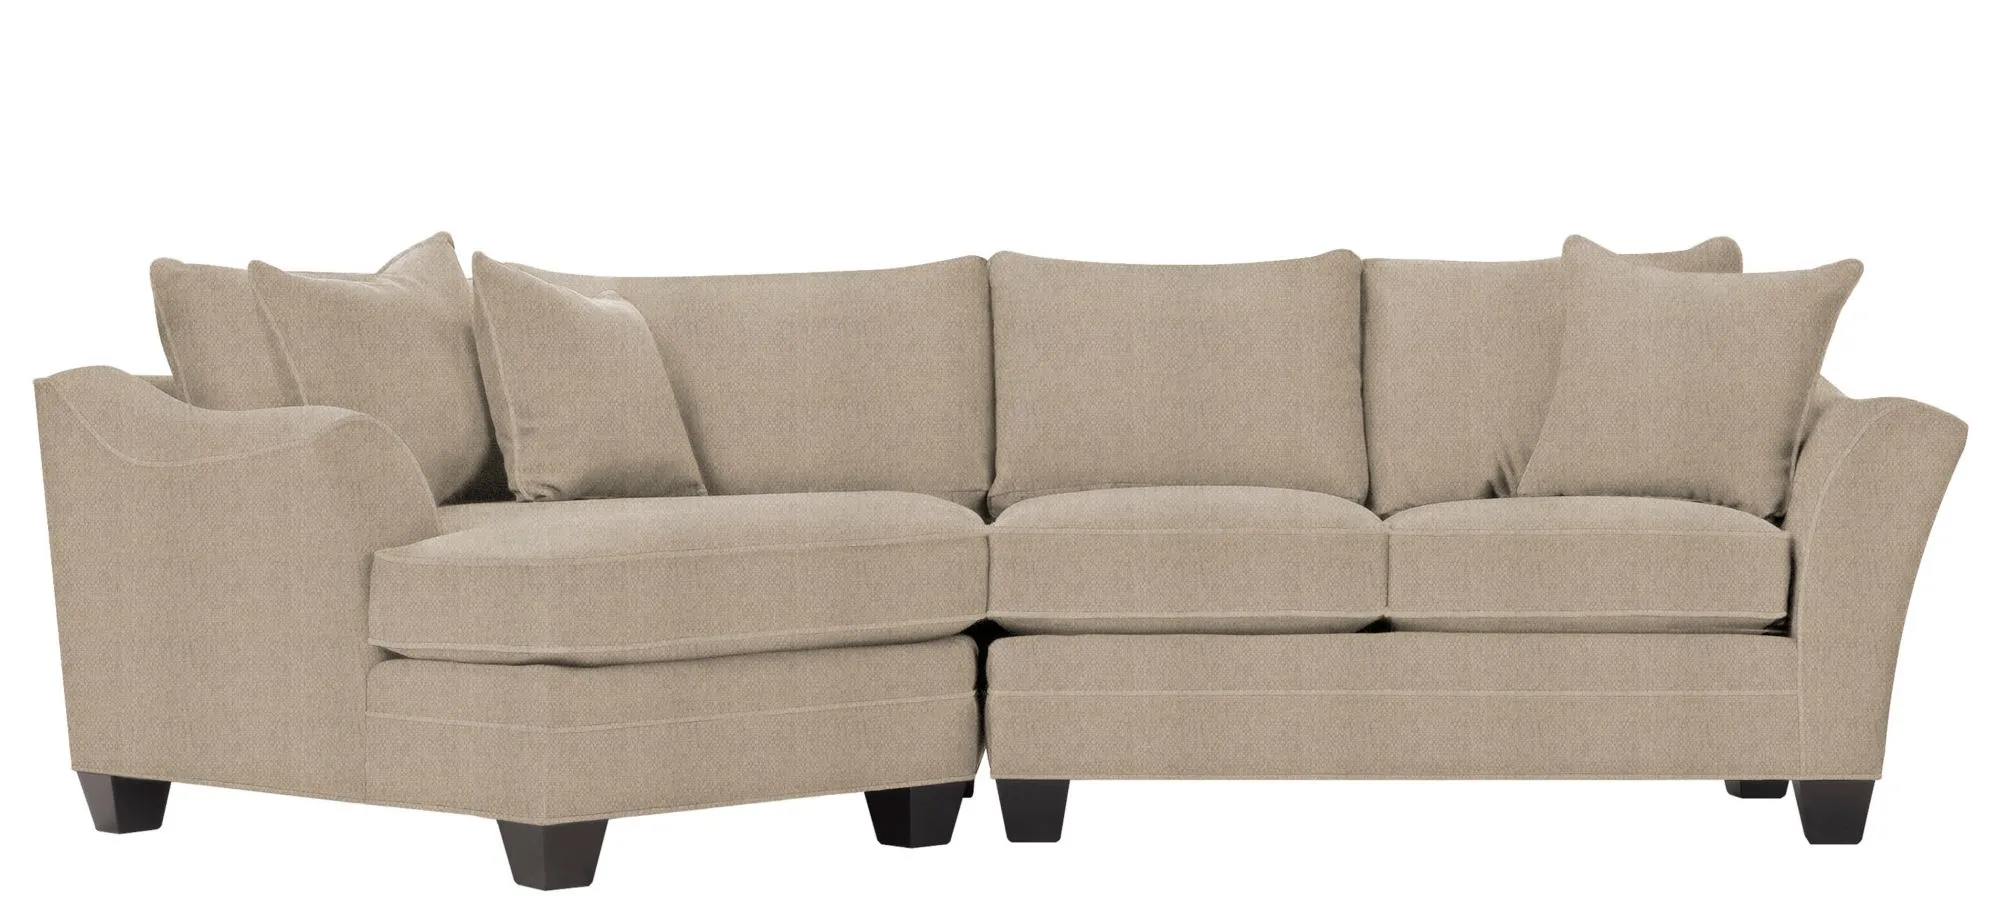 Foresthill 2-pc. Left Hand Cuddler Sectional Sofa in Sugar Shack Putty by H.M. Richards